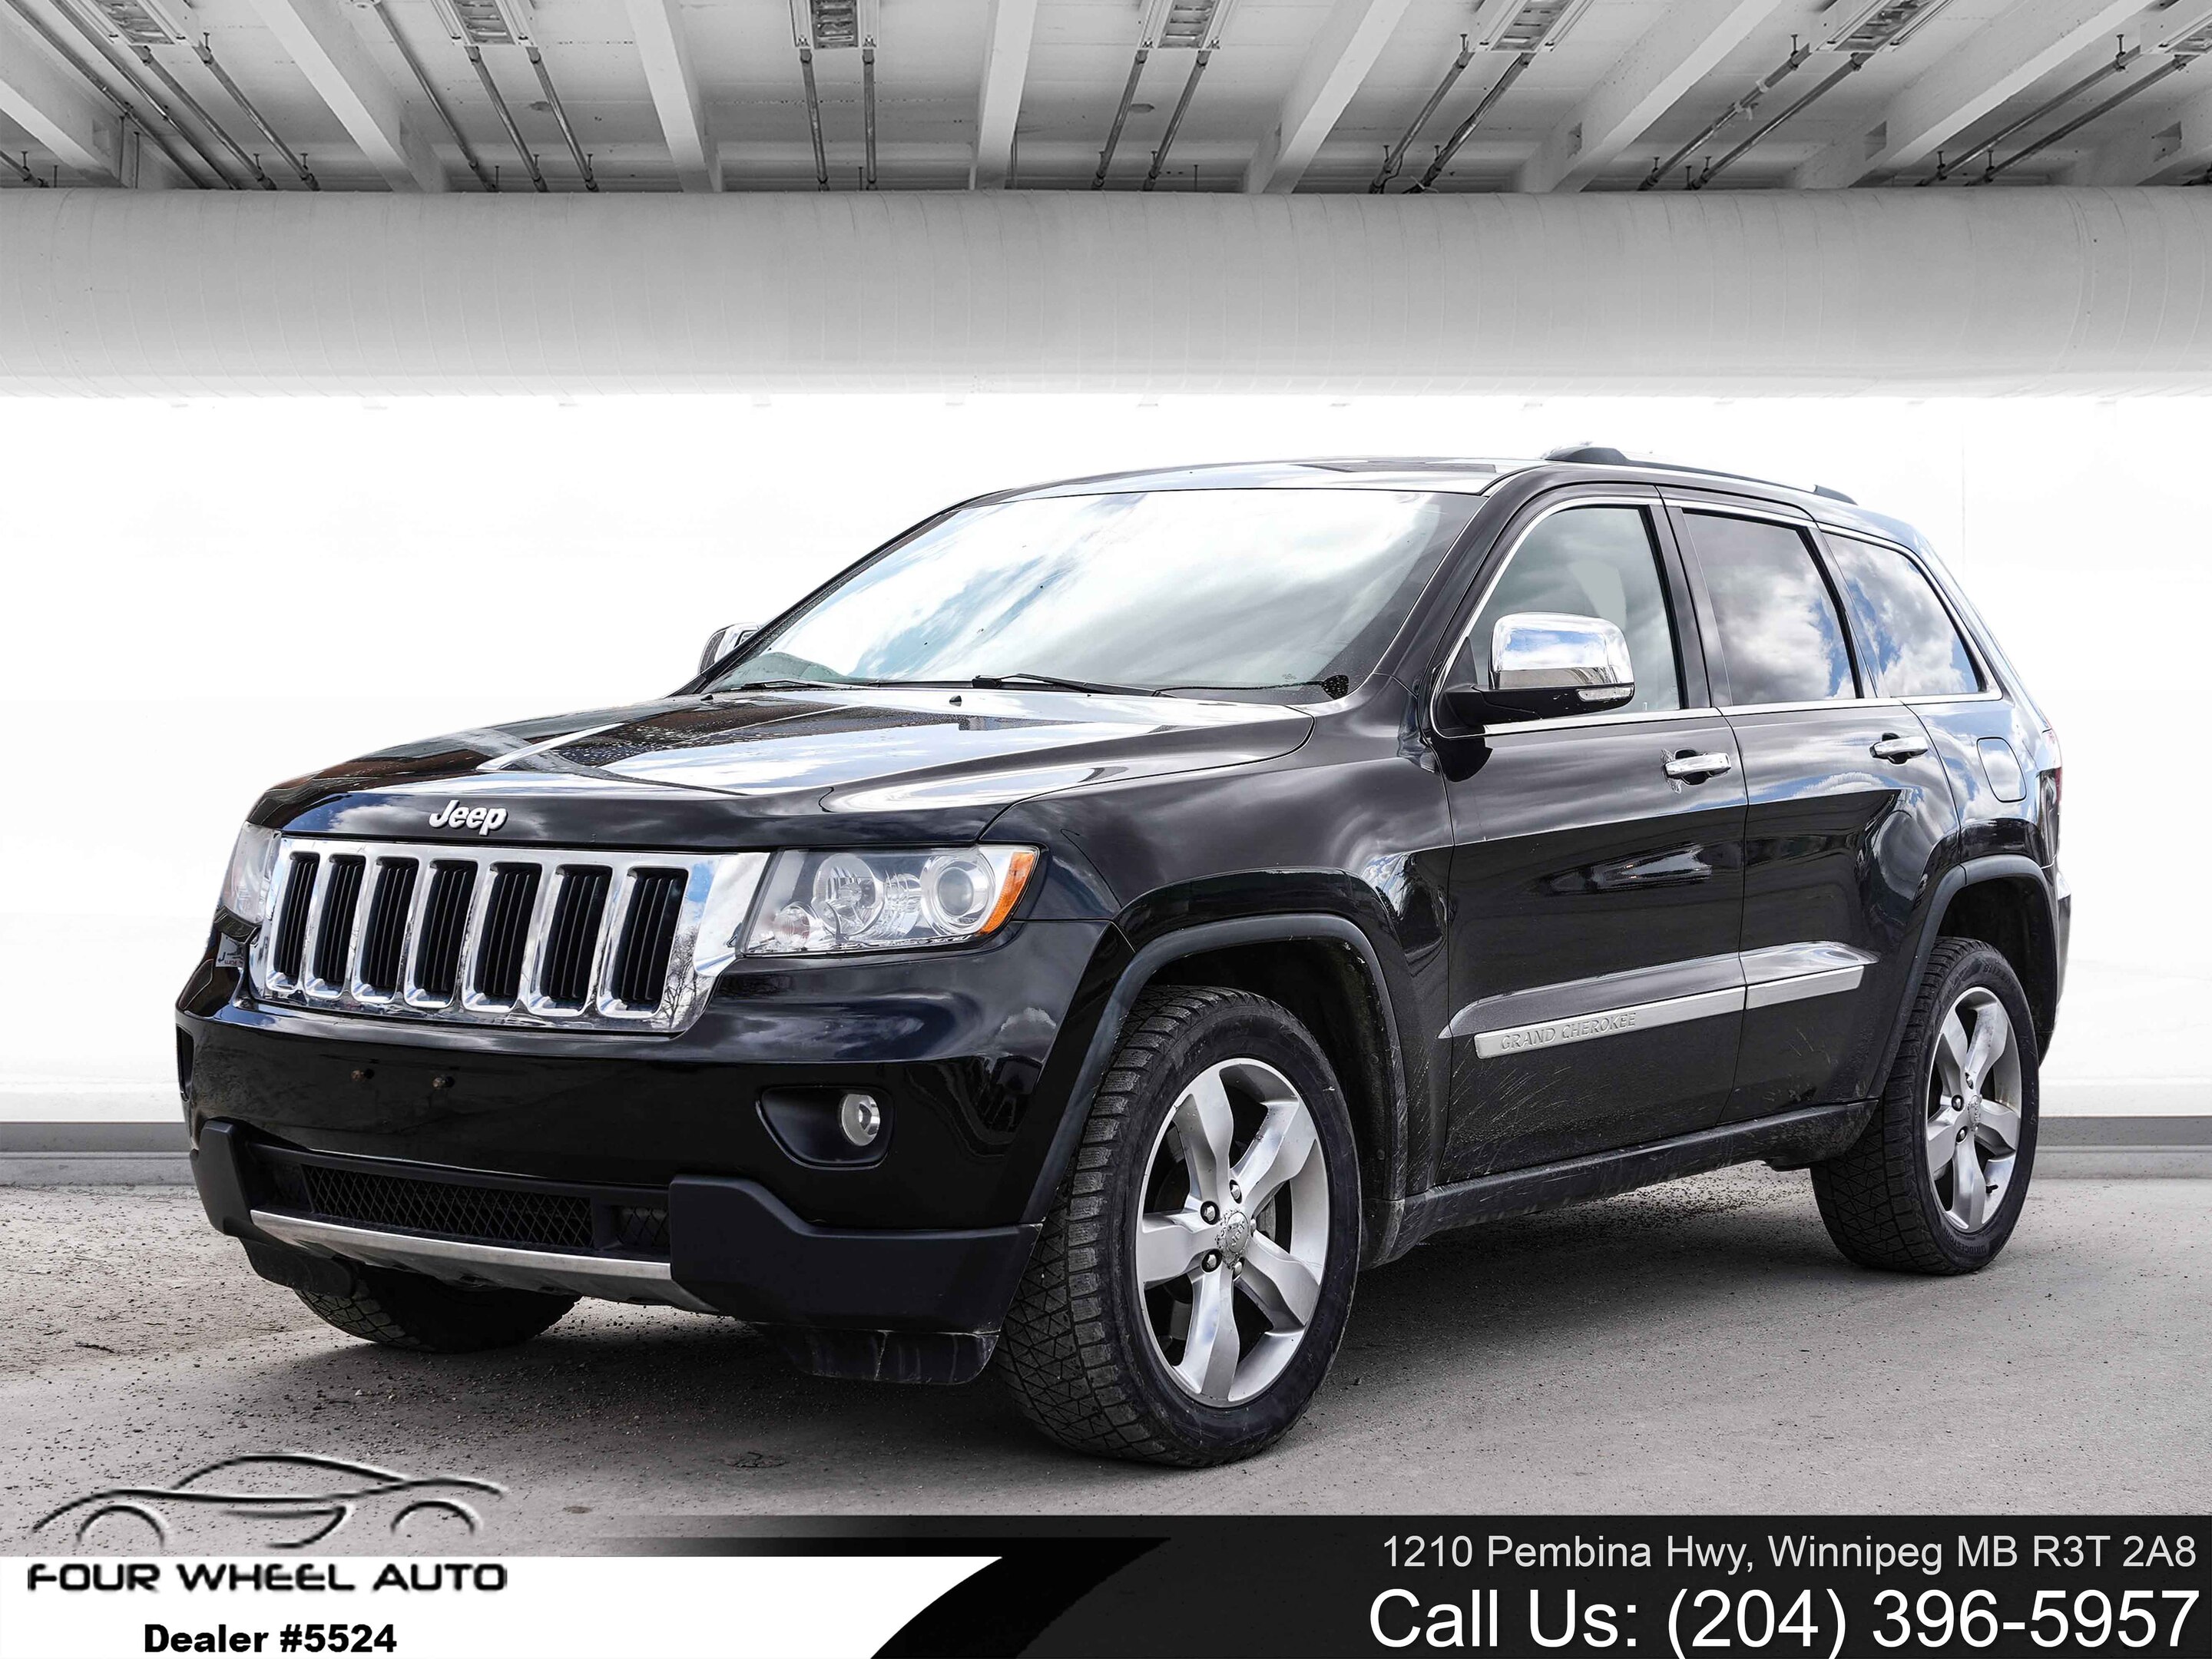 2011 Jeep Grand Cherokee Limited |Clean Title|Execellent Condition|4WD|